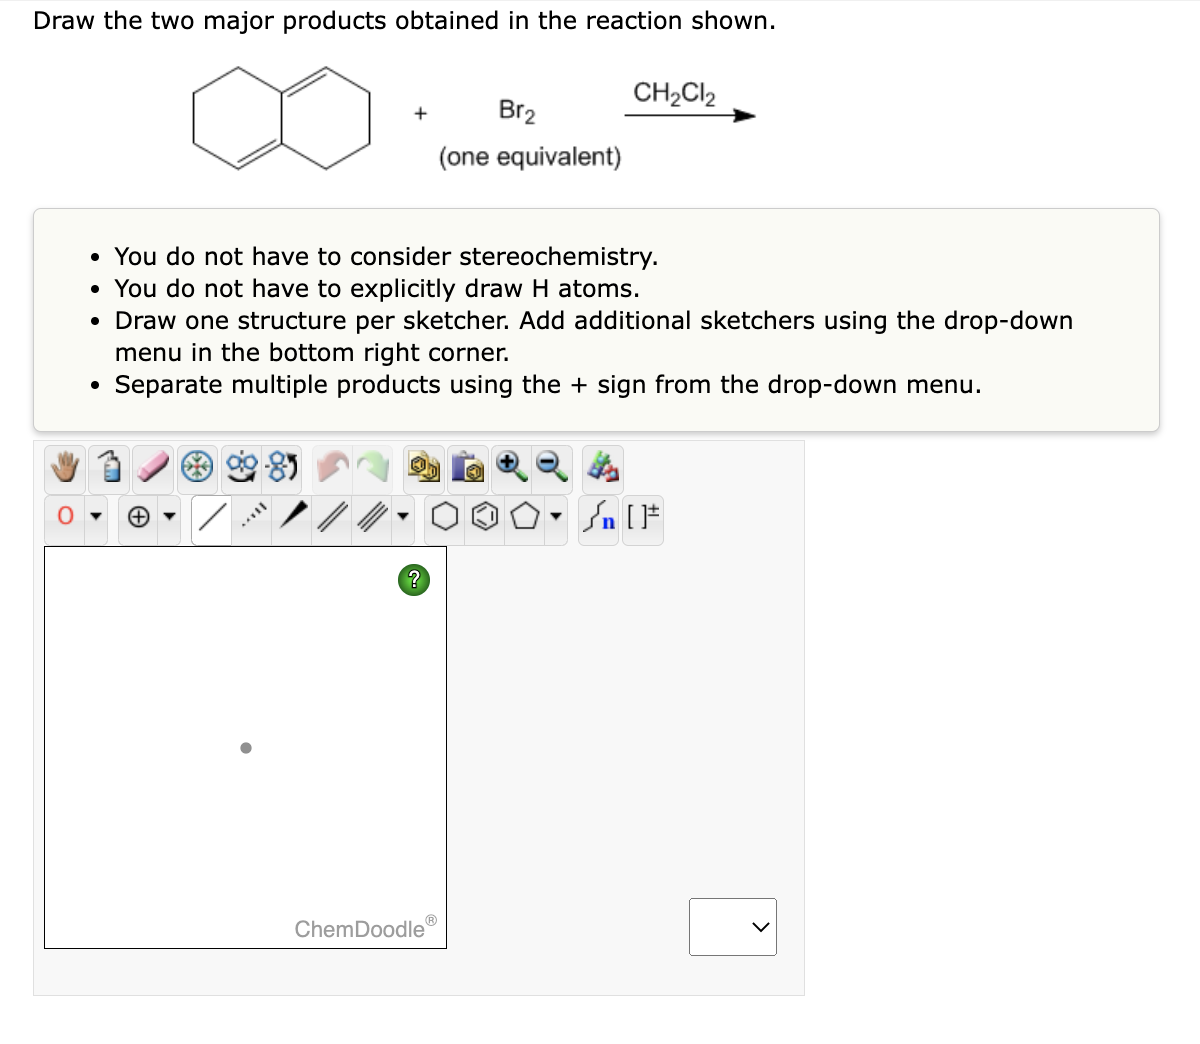 Draw the two major products obtained in the reaction shown.
+
?
Br₂
(one equivalent)
• You do not have to consider stereochemistry.
• You do not have to explicitly draw H atoms.
• Draw one structure per sketcher. Add additional sketchers using the drop-down
menu in the bottom right corner.
Separate multiple products using the + sign from the drop-down menu.
ChemDoodleⓇ
CH₂Cl2
Sn [F
>